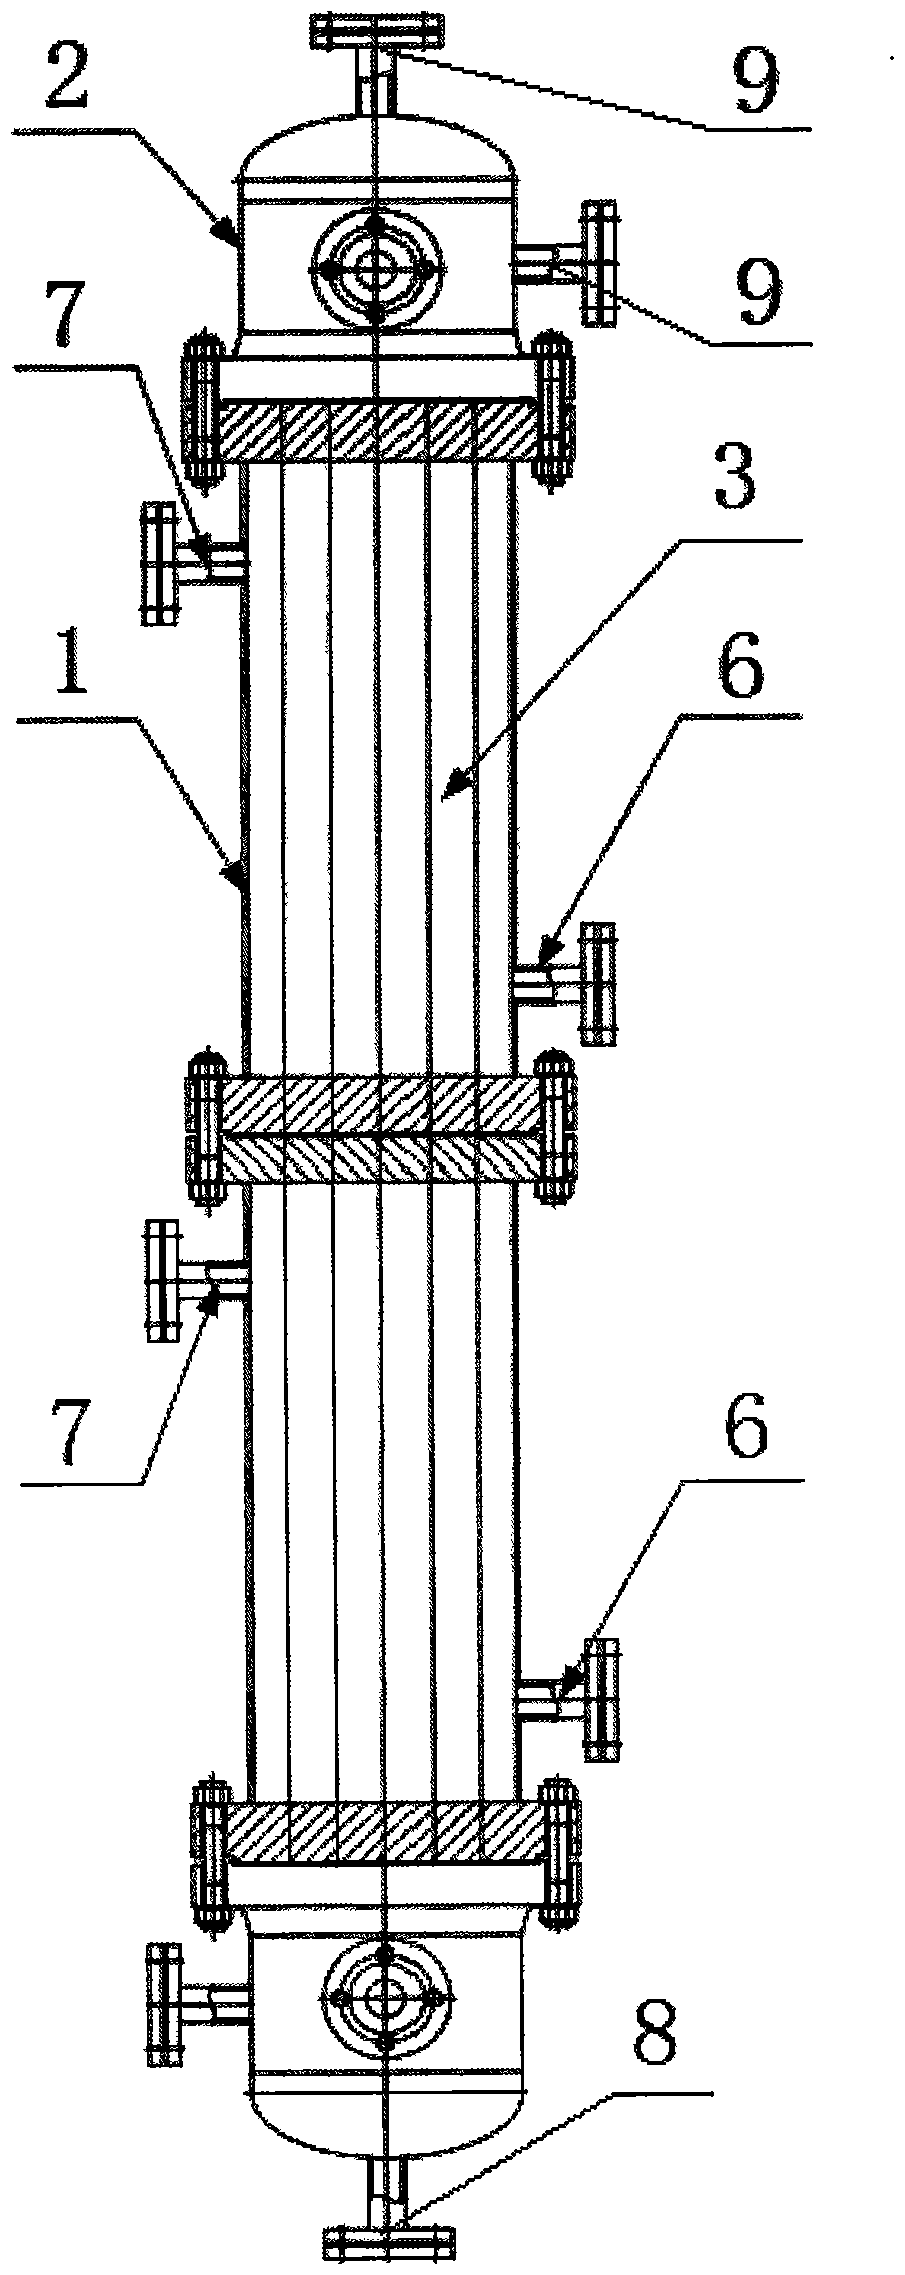 Intelligent Industrialized Microchannel Continuous Reactor